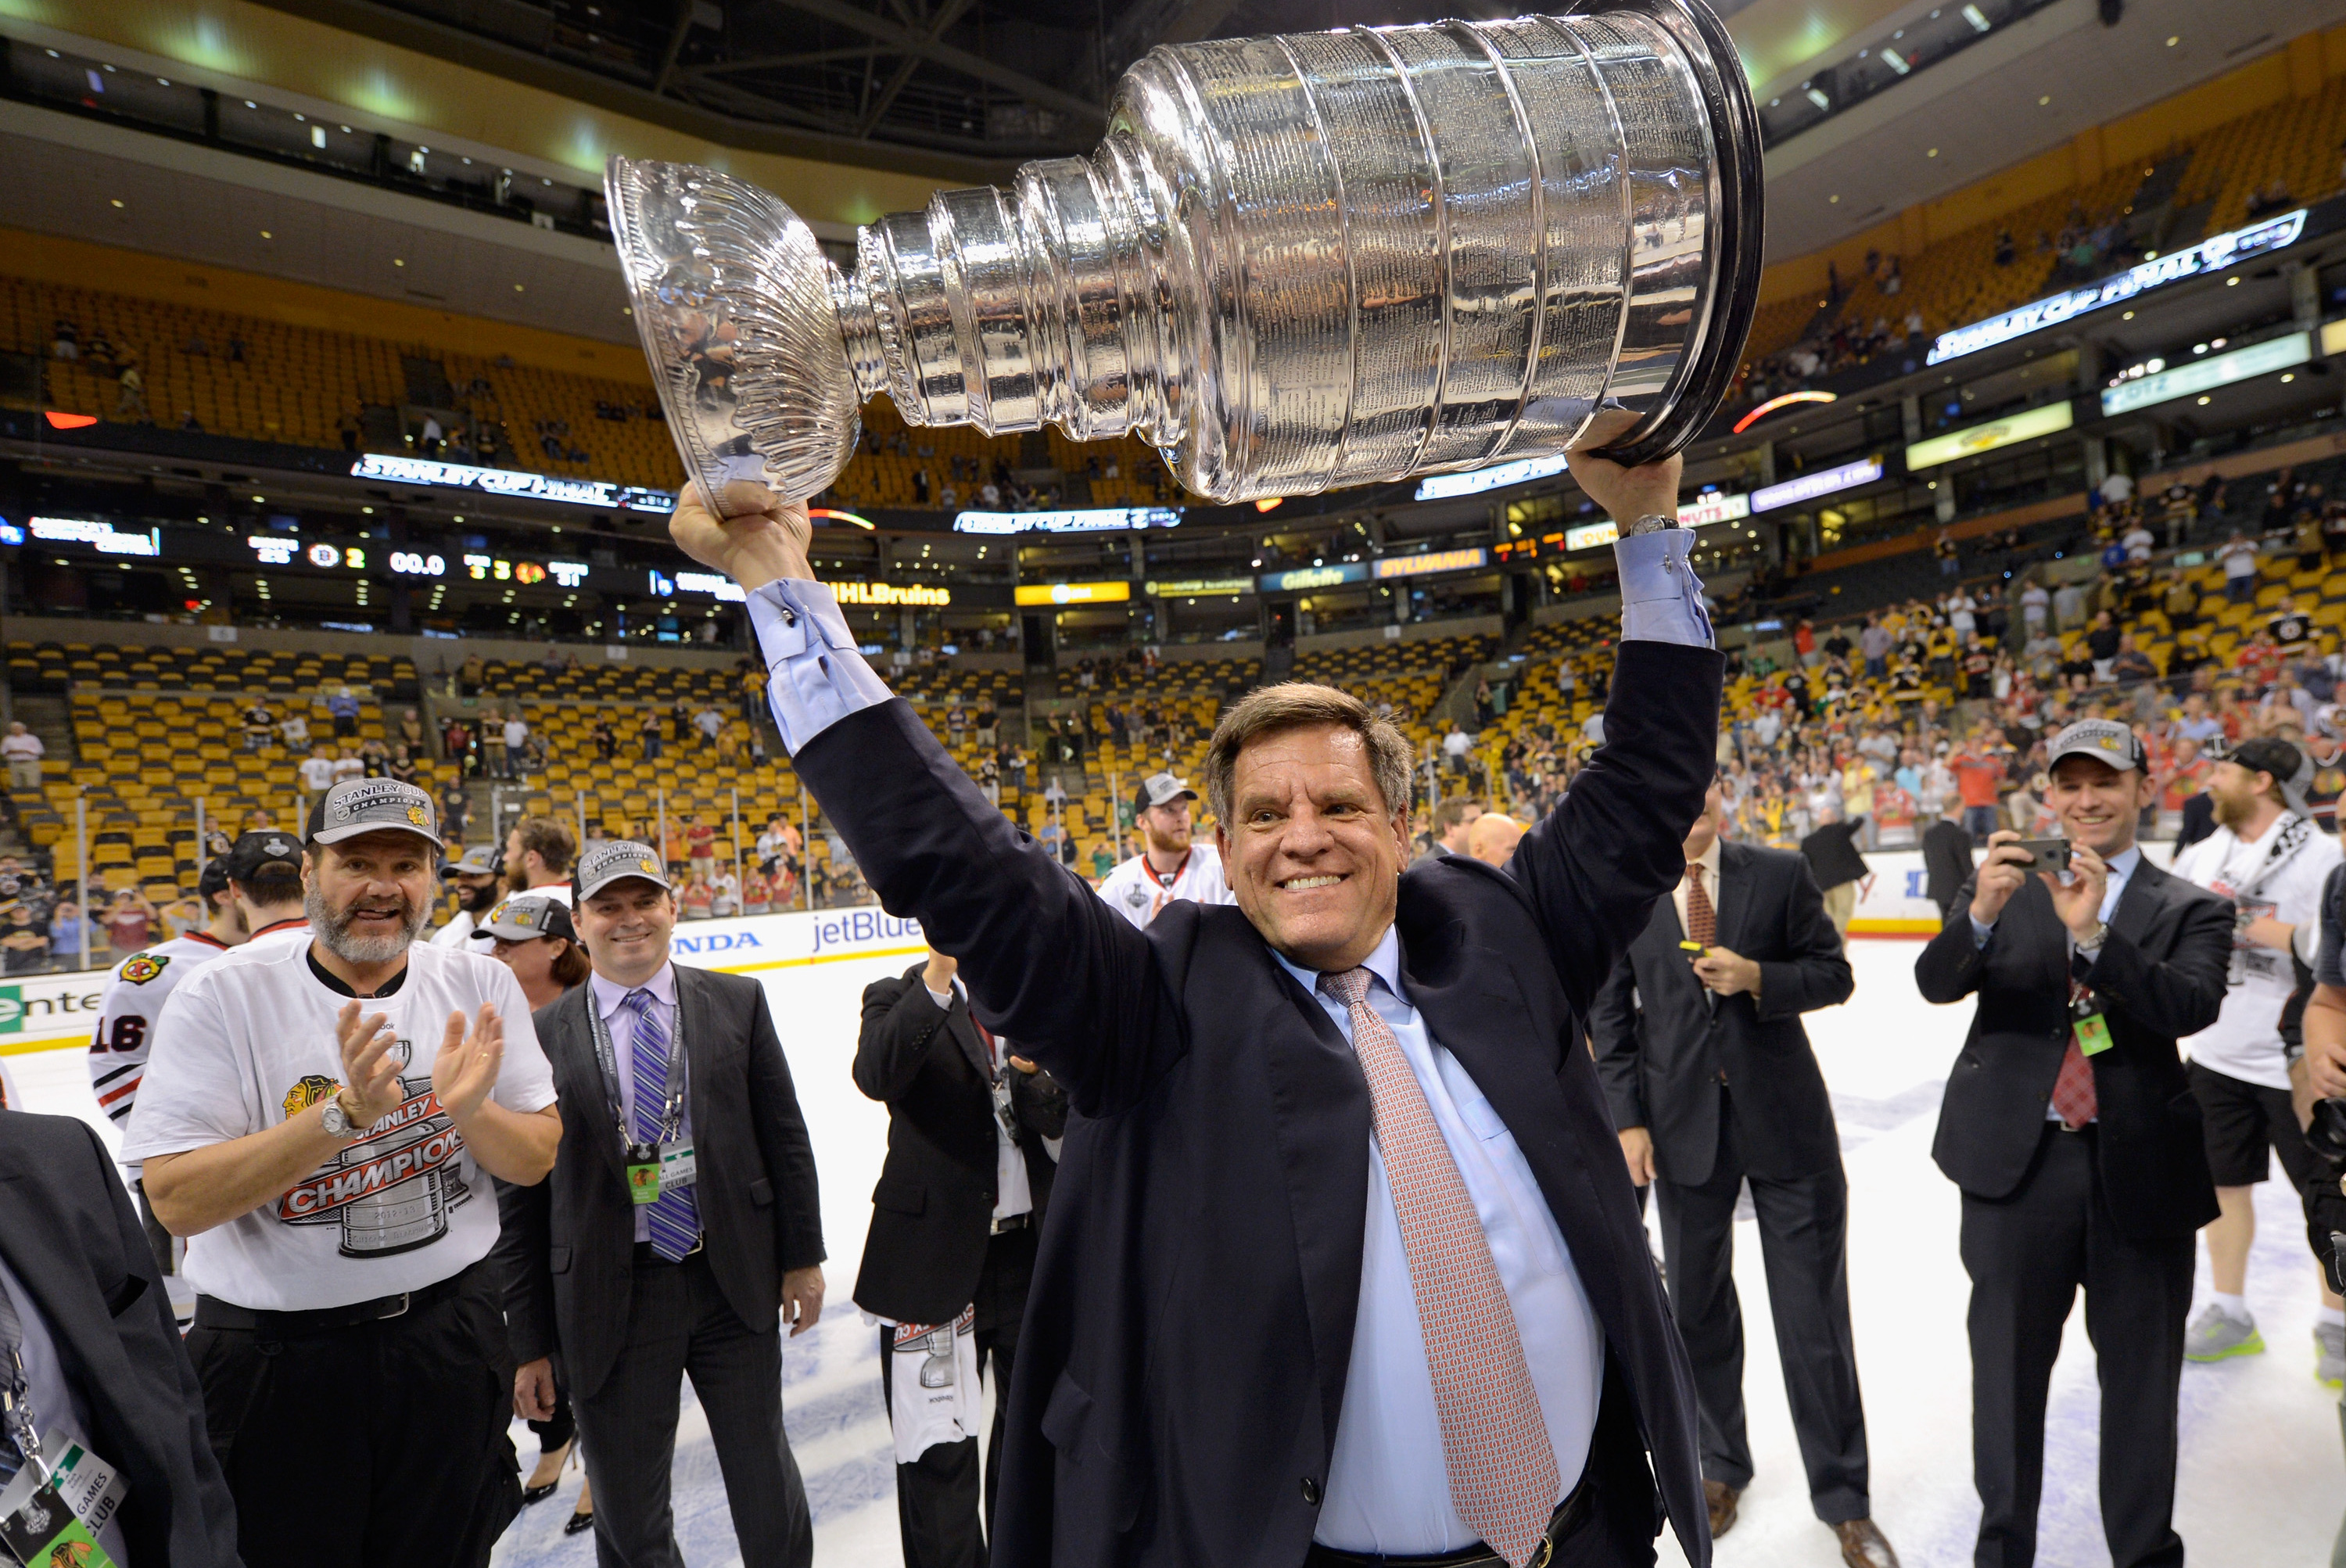 Rocky Wirtz The Man Behind the Stanley Cup Revival: An iconic legacy  (BIOGRAPHY OF THE RICH AND FAMOUS)